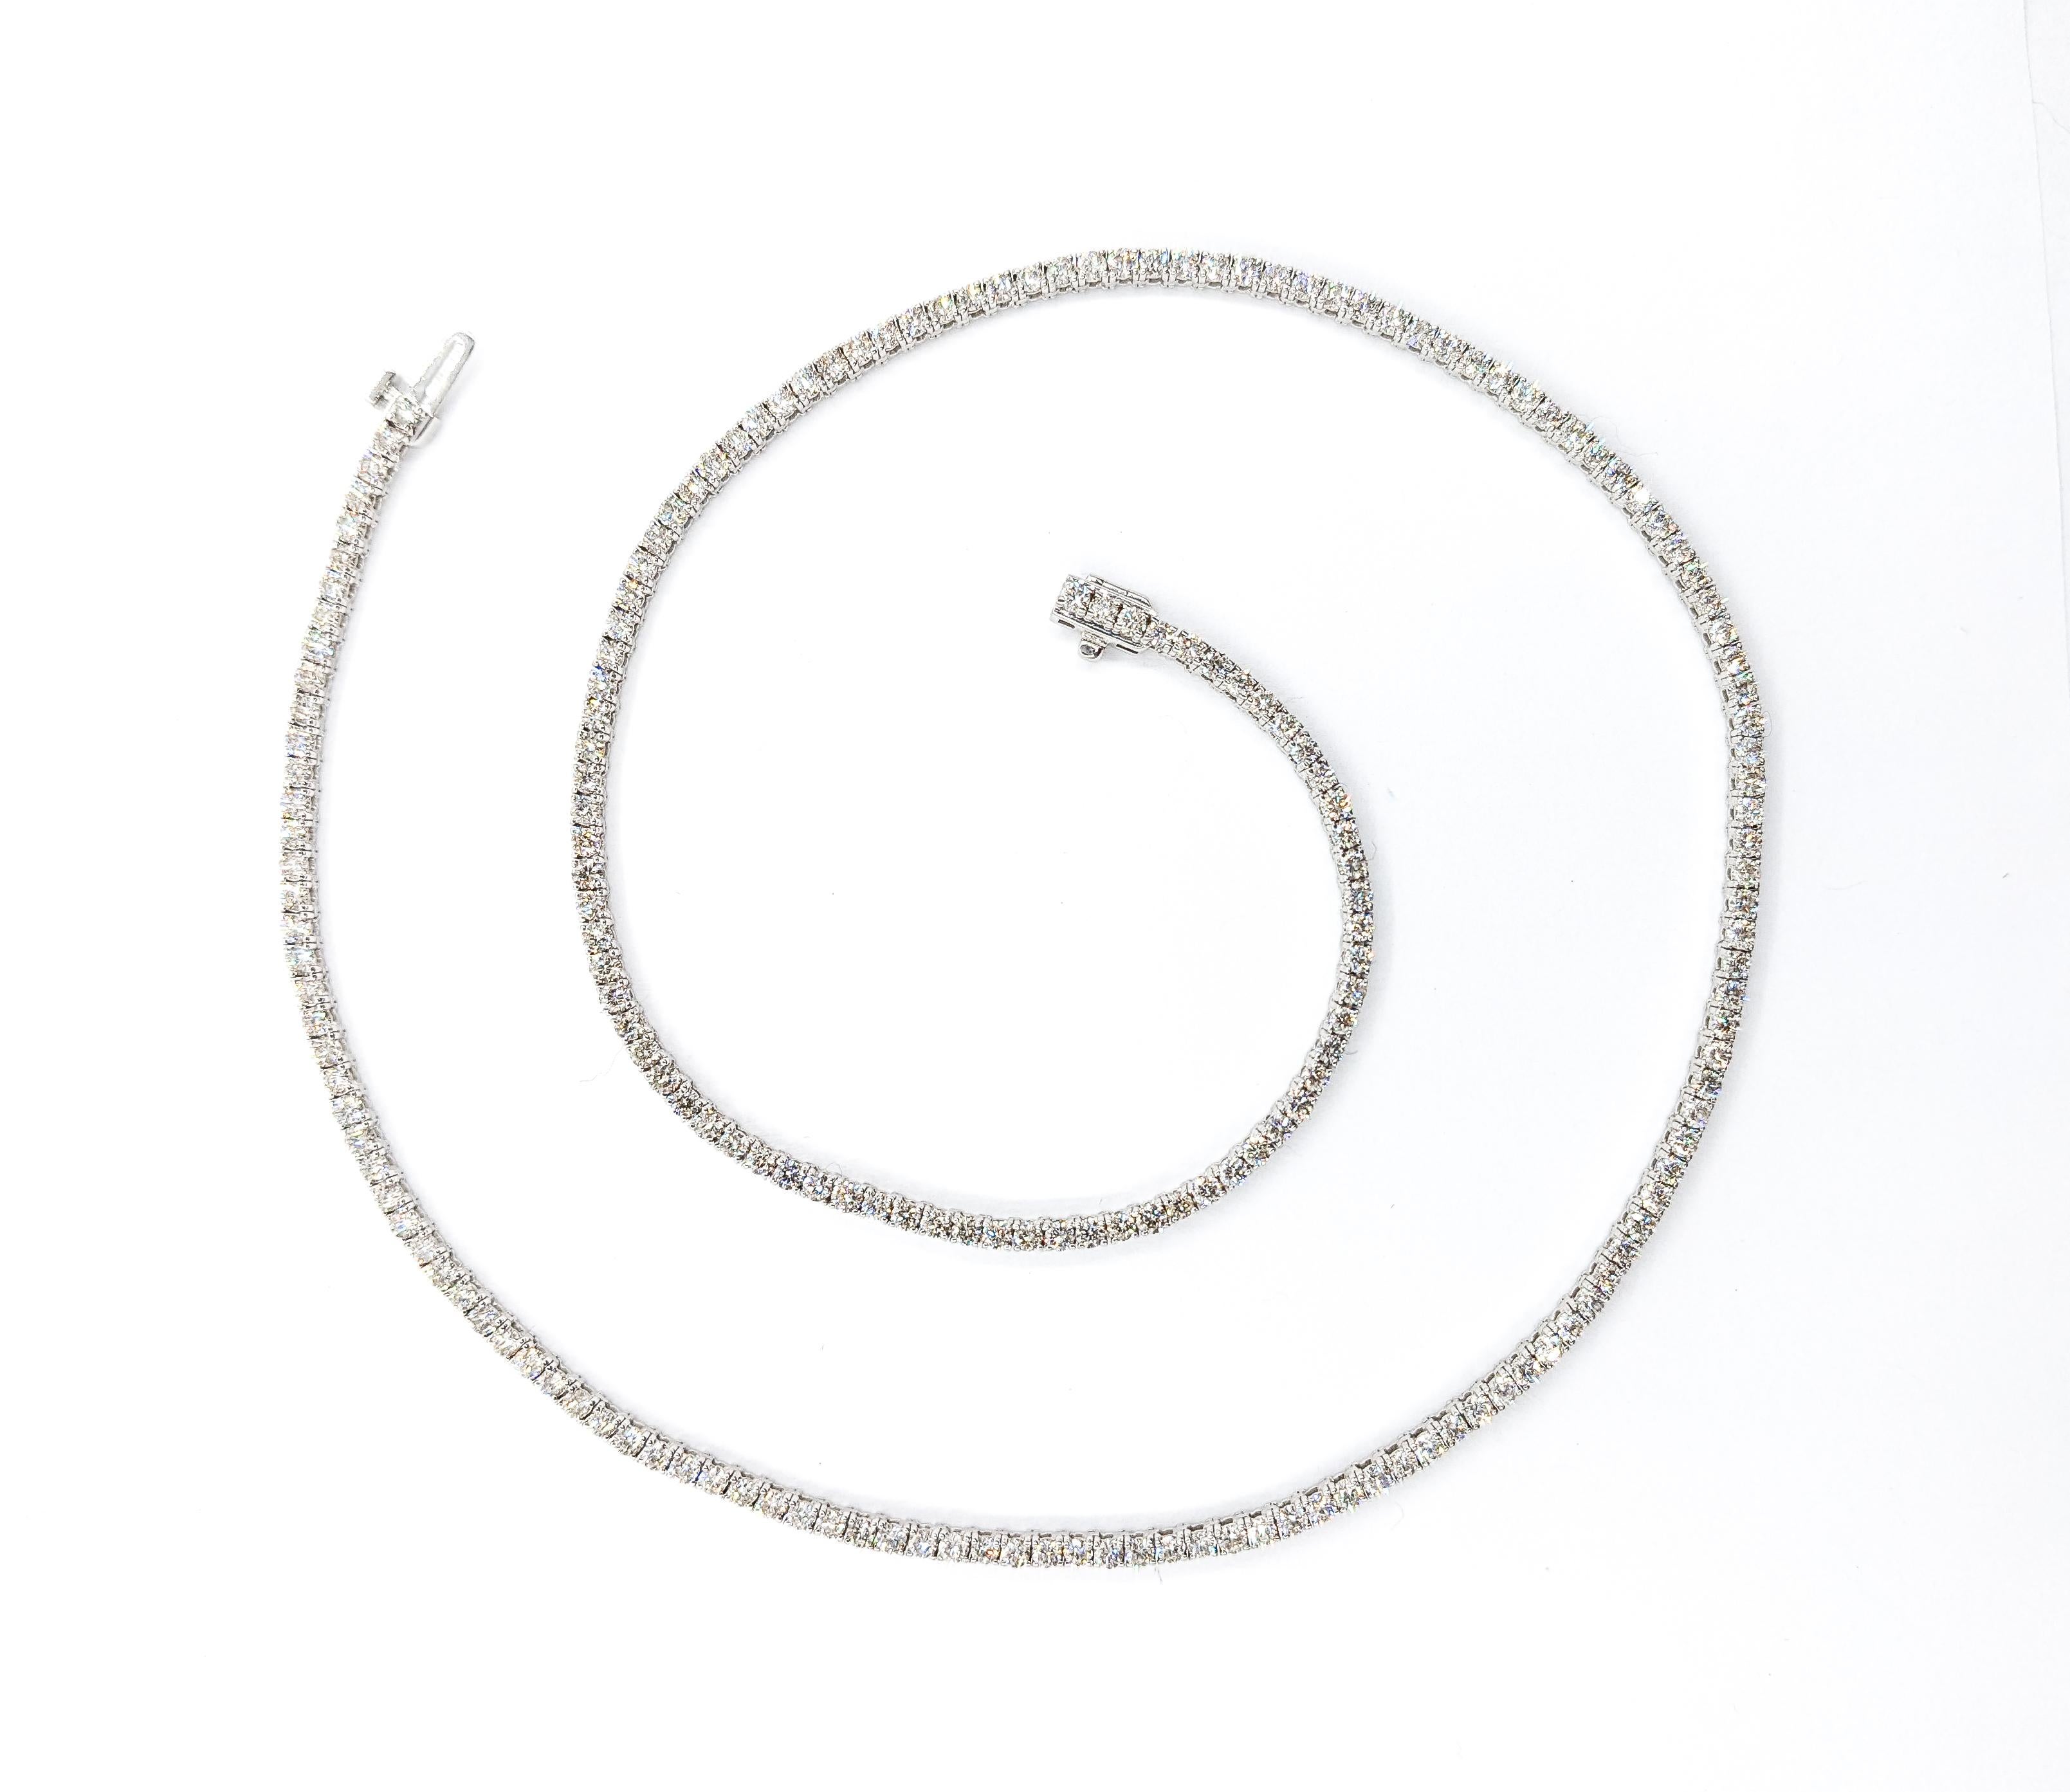 8ctw Diamond Tennis Necklace in White Gold In New Condition For Sale In Bloomington, MN